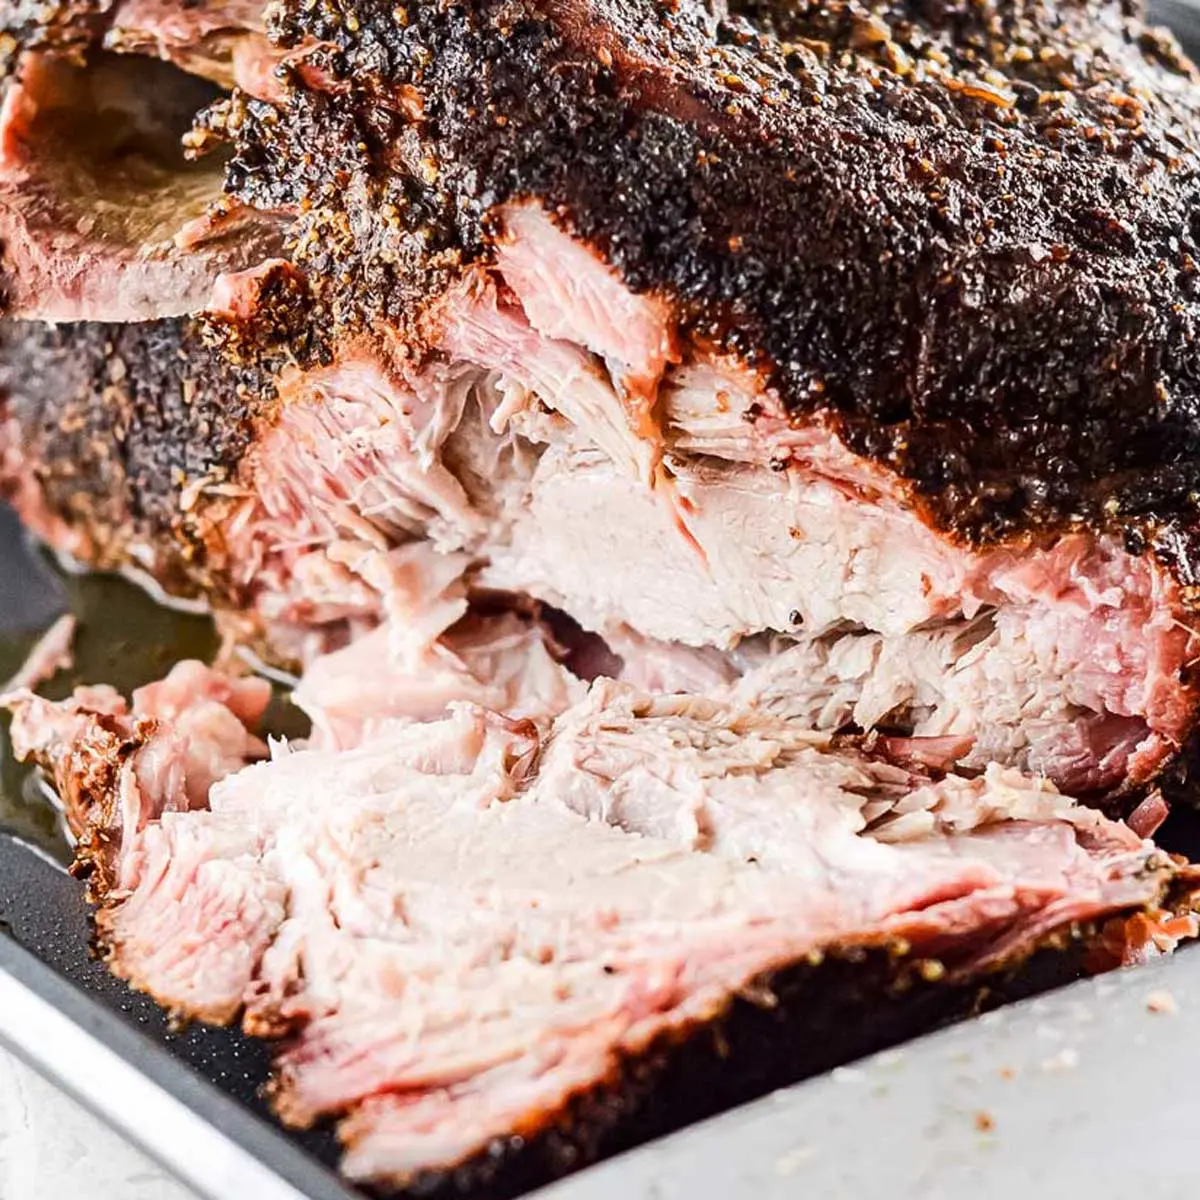 smoked pork shoulder - Does a smoked pork shoulder need to be cooked